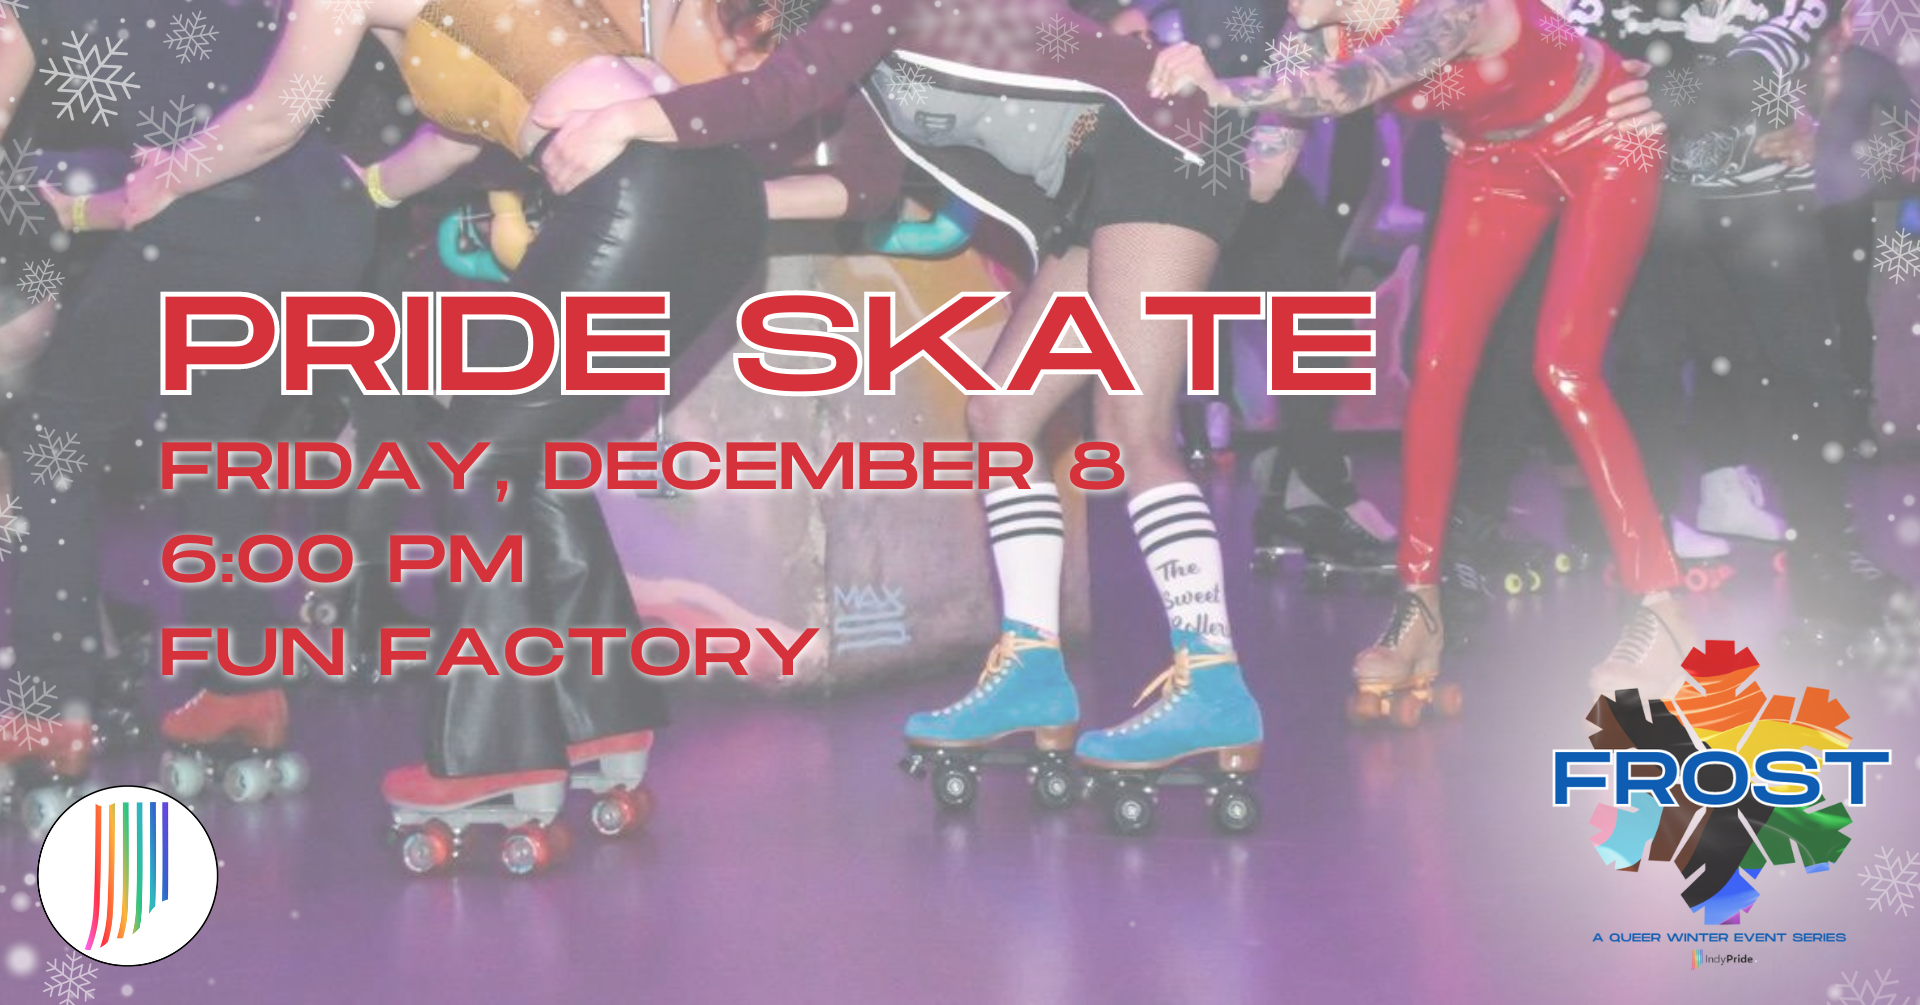 Pride Skate – a part of the FROST event series